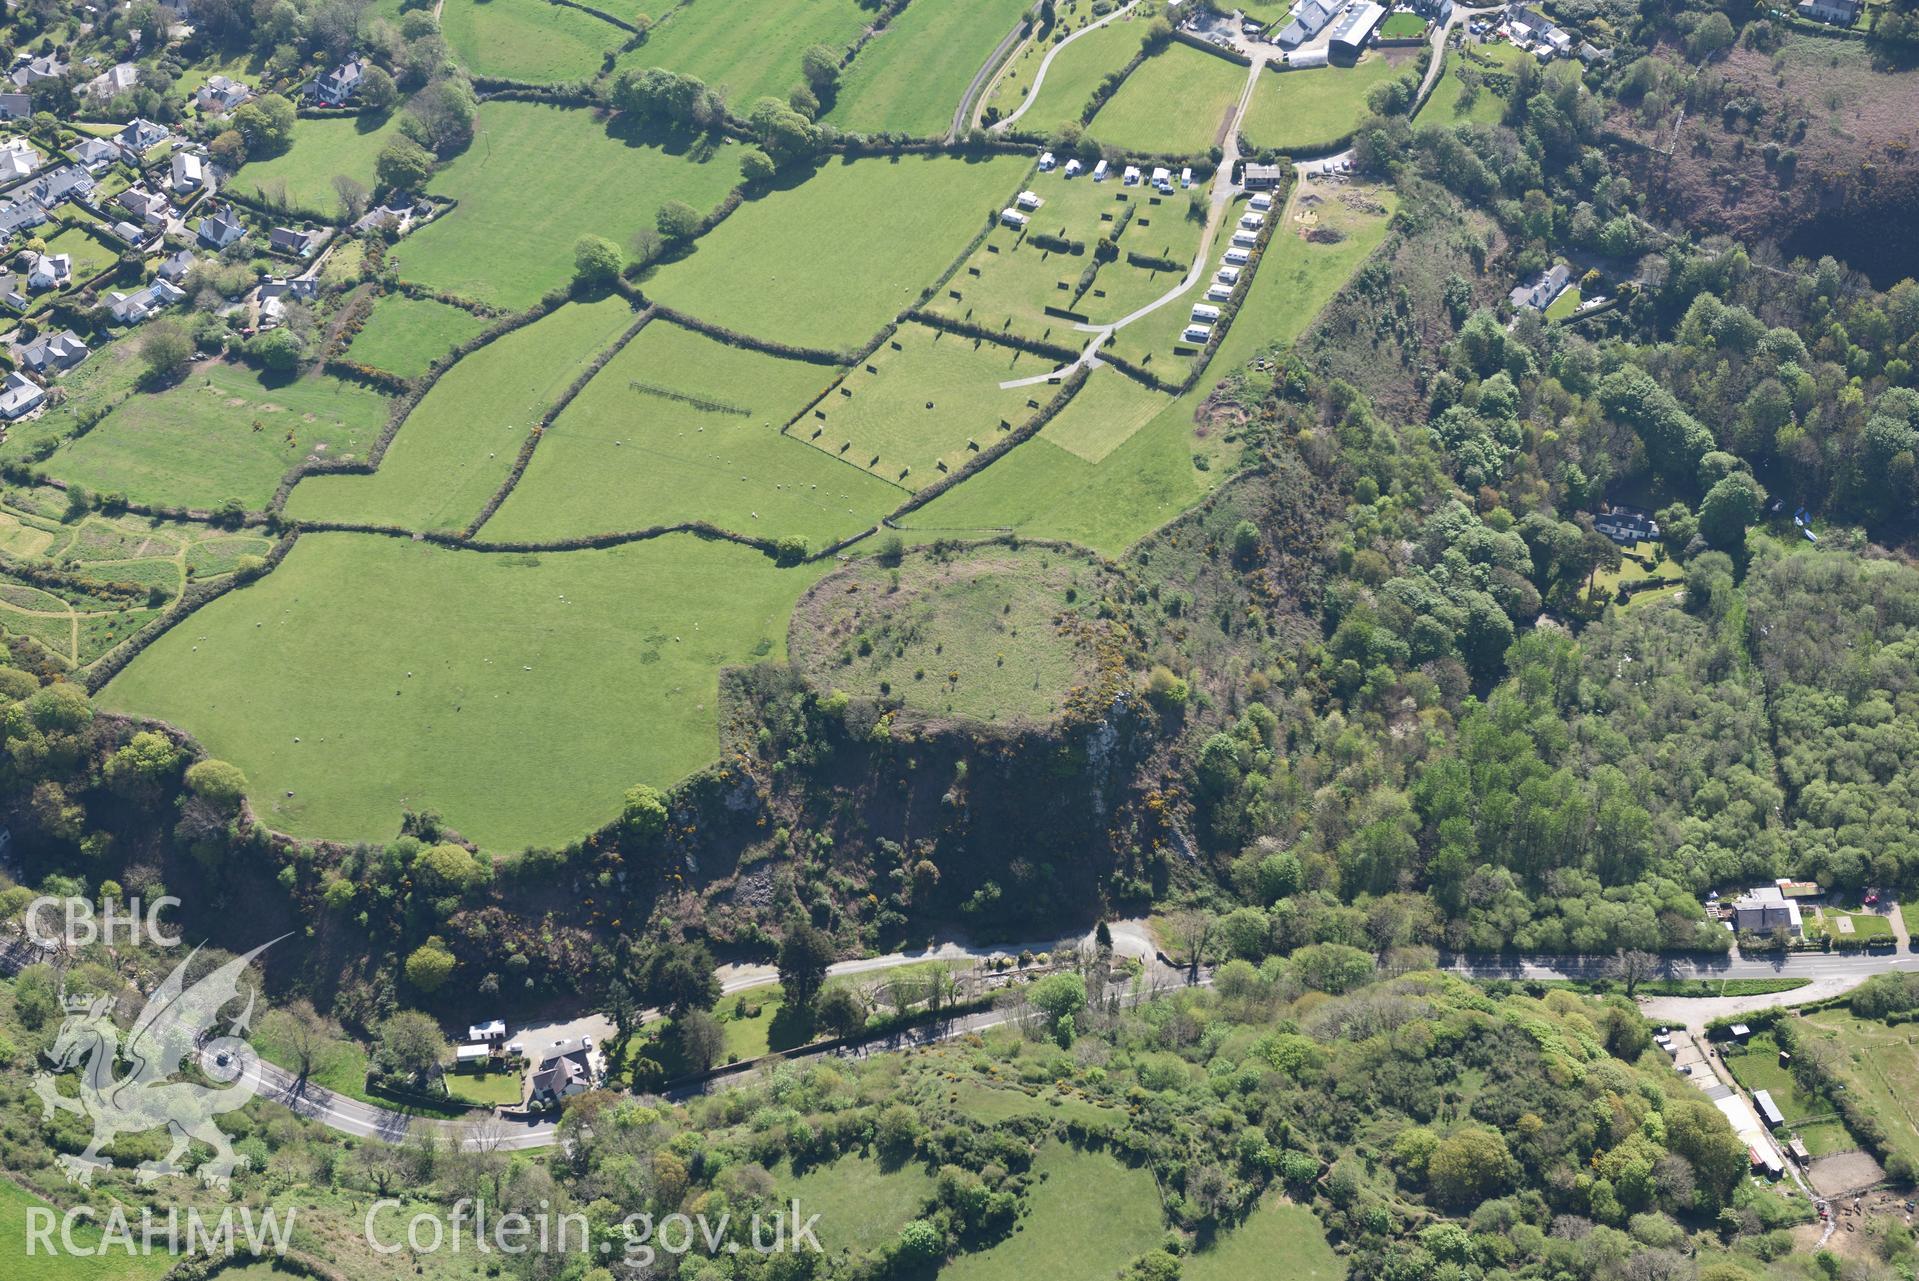 Aerial photography of nant Castell and Pen y Gaer taken on 3rd May 2017.  Baseline aerial reconnaissance survey for the CHERISH Project. ? Crown: CHERISH PROJECT 2017. Produced with EU funds through the Ireland Wales Co-operation Programme 2014-2020. All